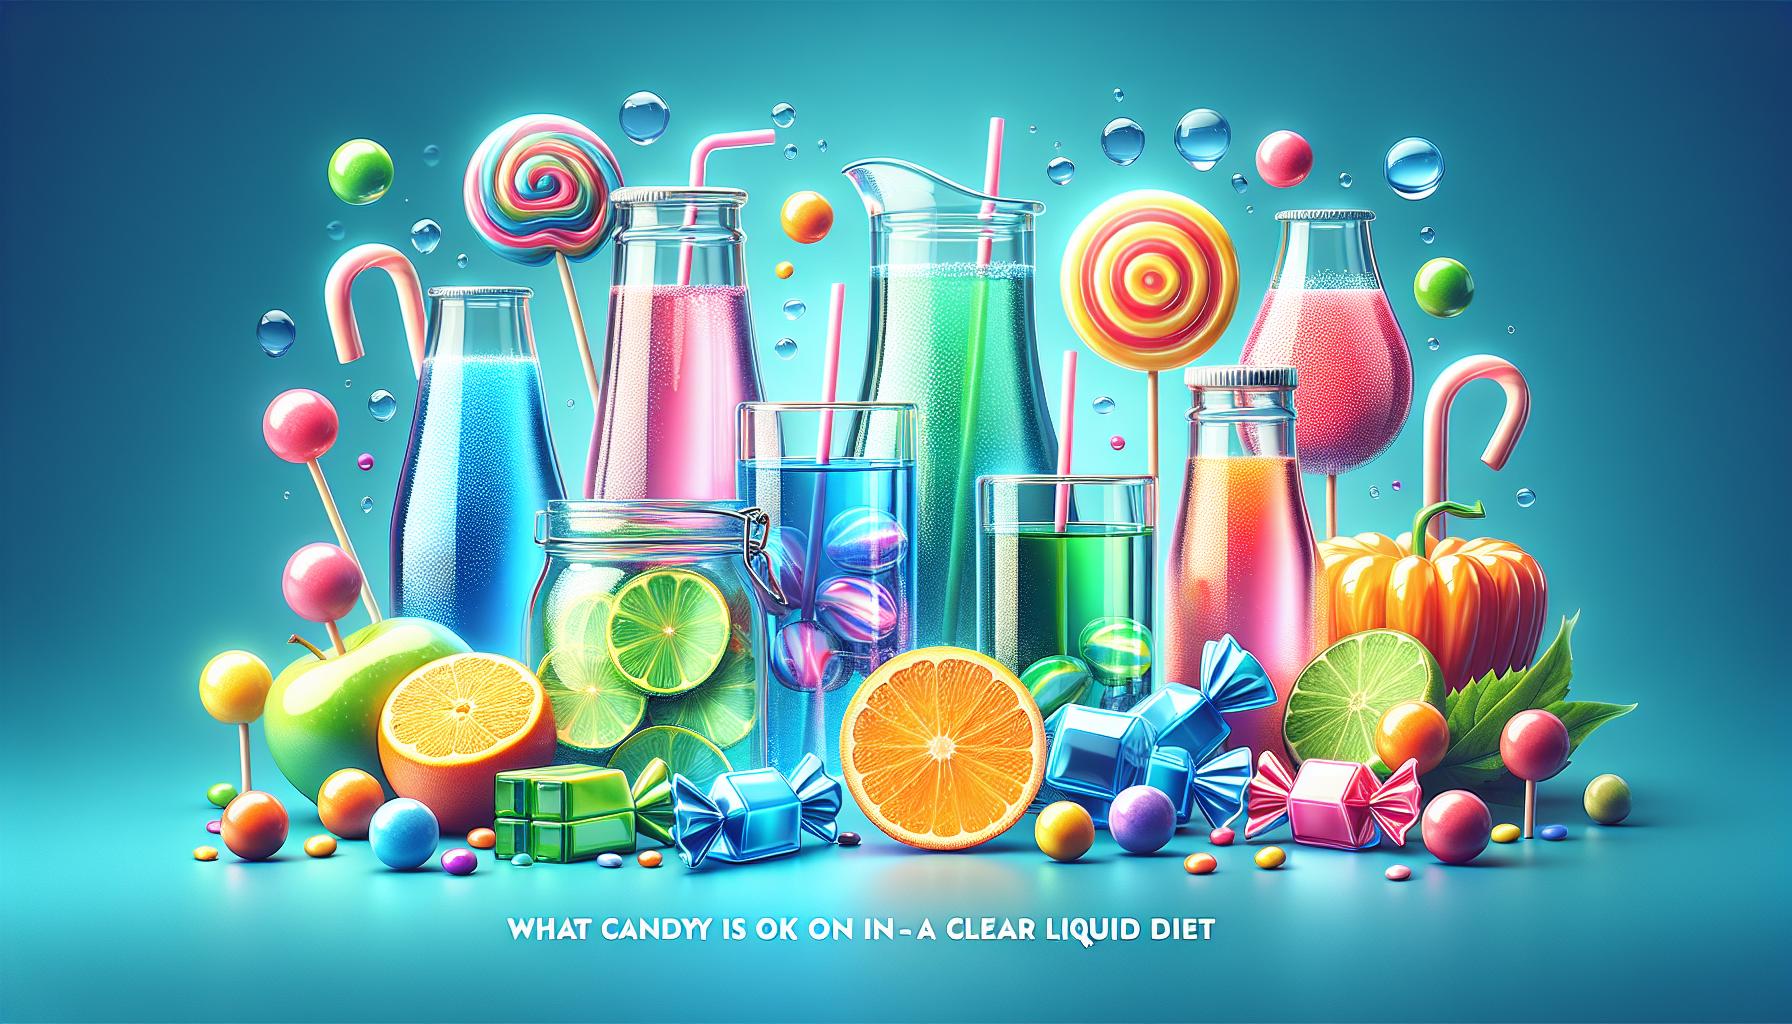 Is Hard Candy Ok On Clear Liquid Diet